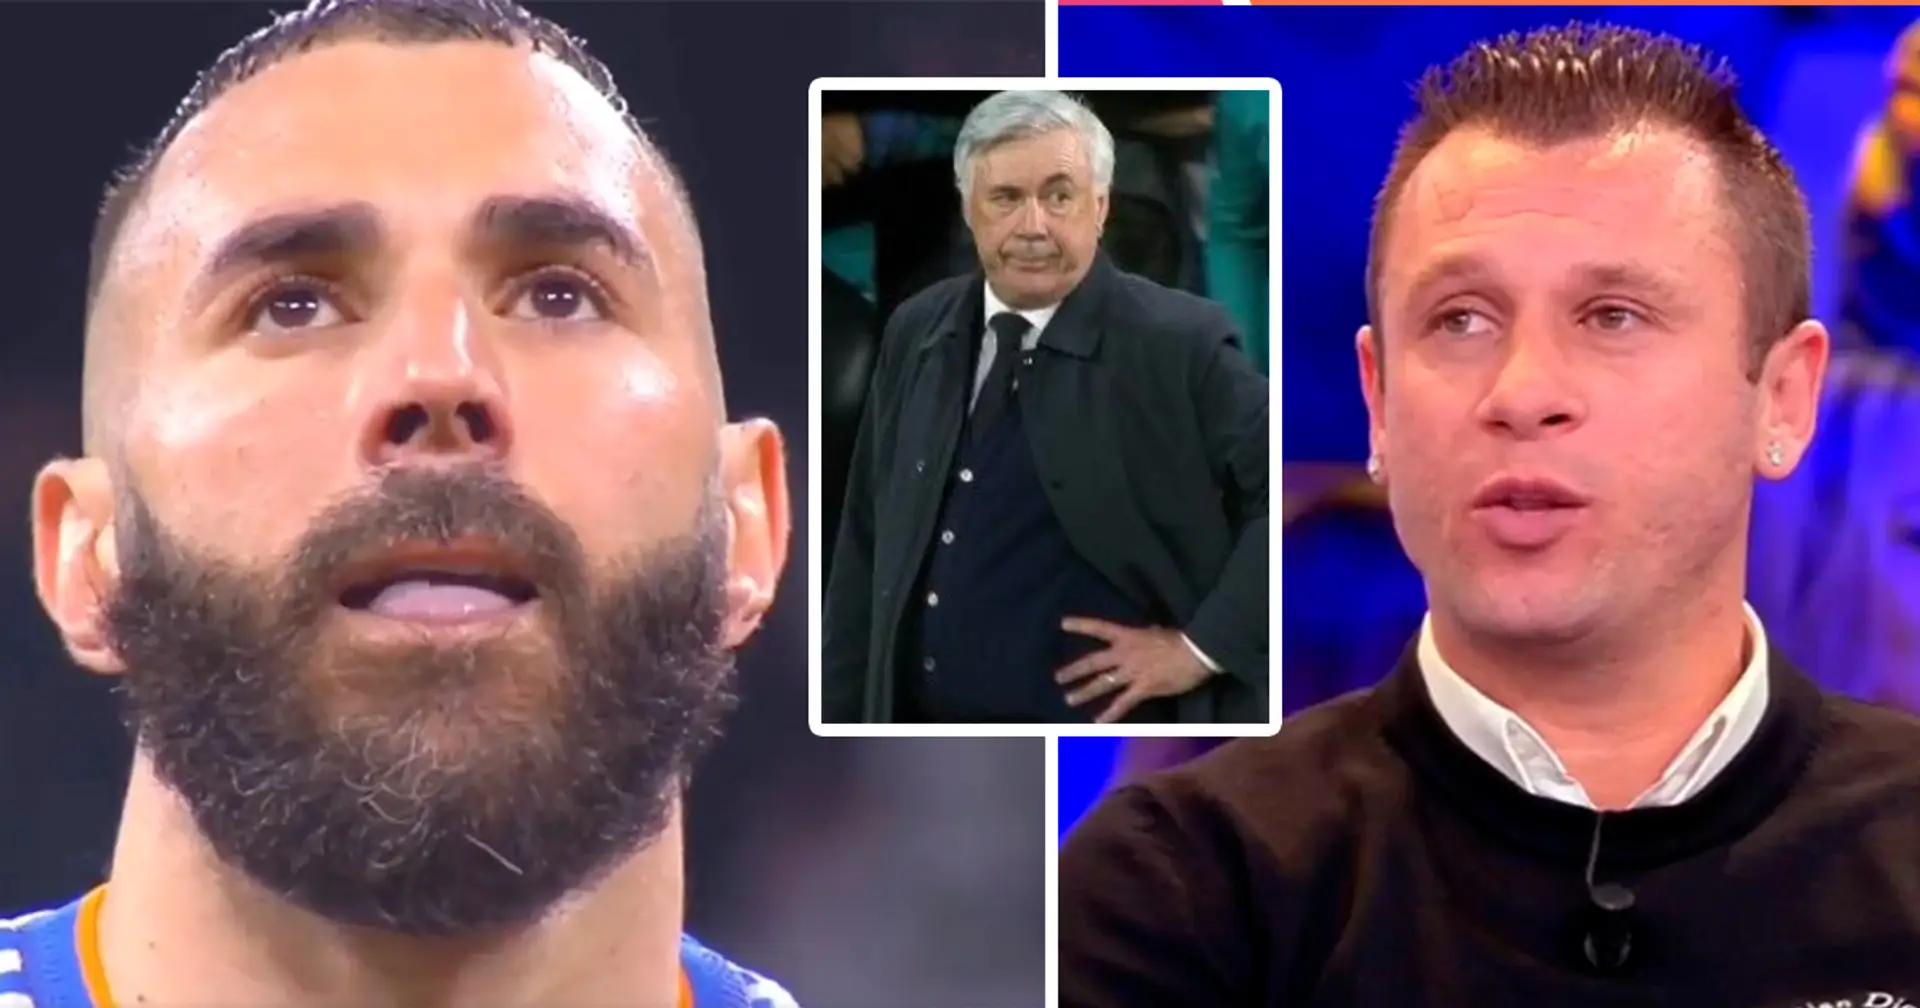 Cassano before Man City clash: 'Real Madrid were lucky against PSG and Chelsea, that will end sooner or later'